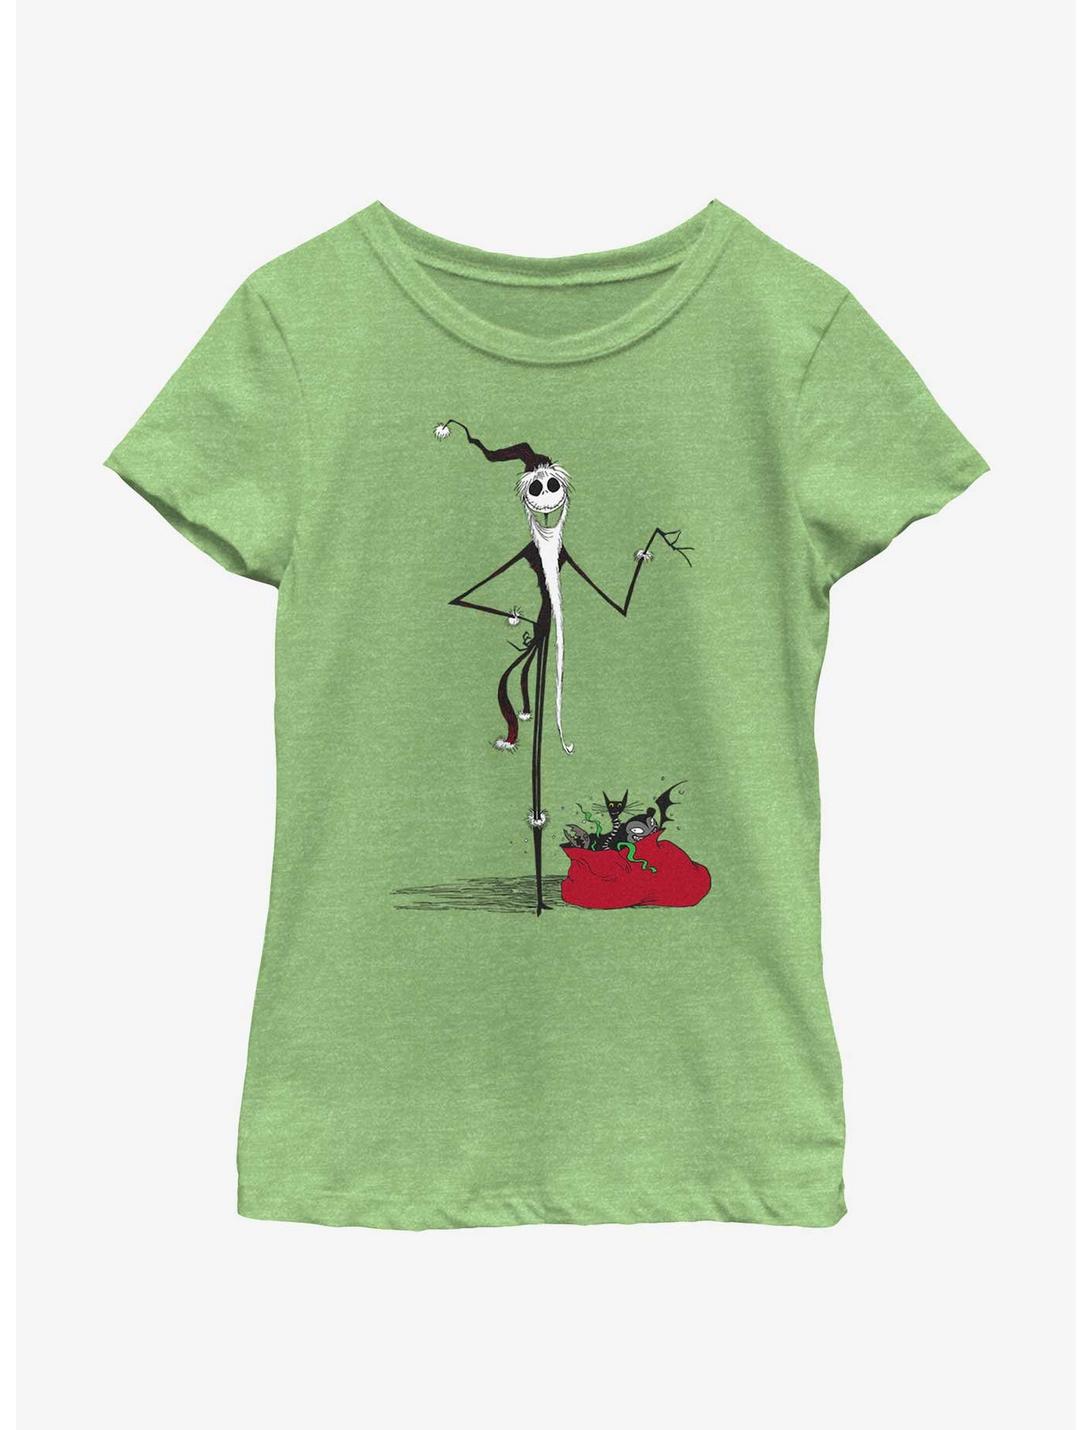 Disney Nightmare Before Christmas Sandy Claws Jack Youth Girls T-Shirt, GRN APPLE, hi-res